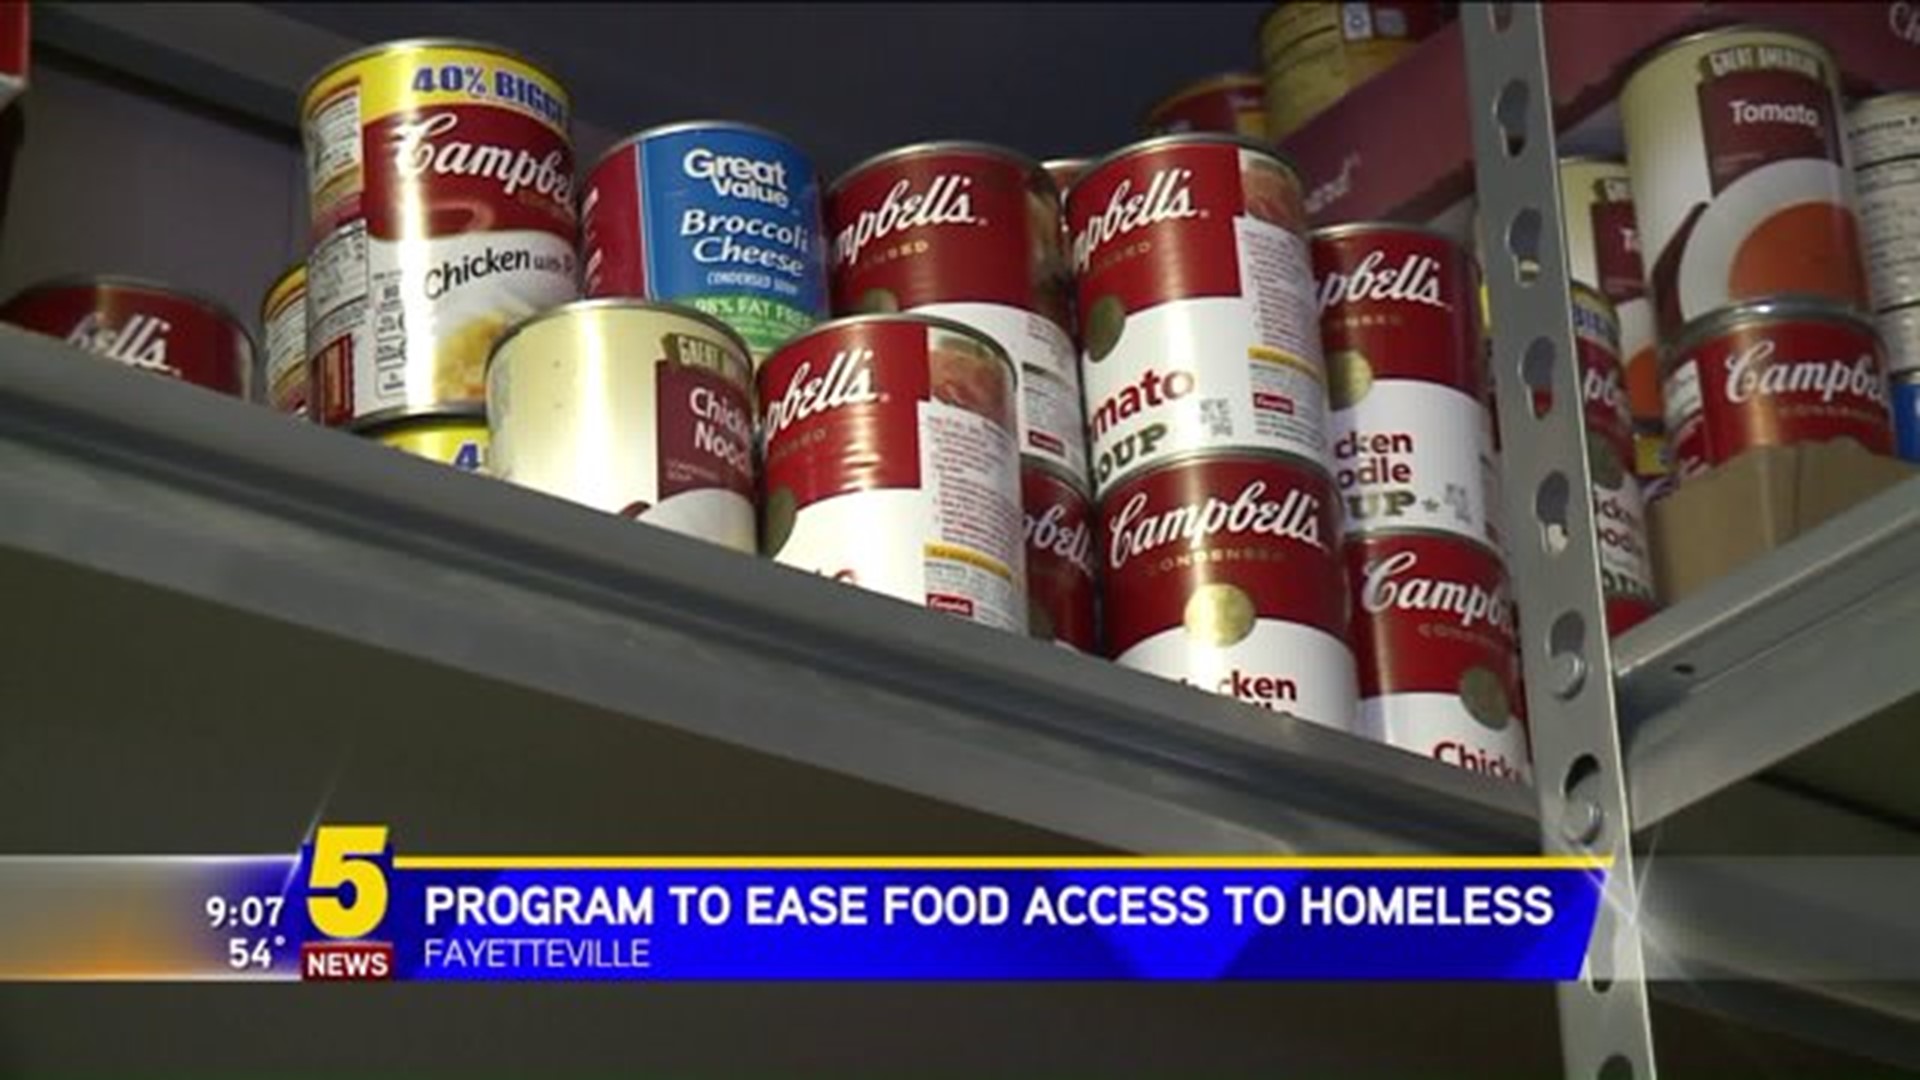 Program To Ease Food Access To Homeless